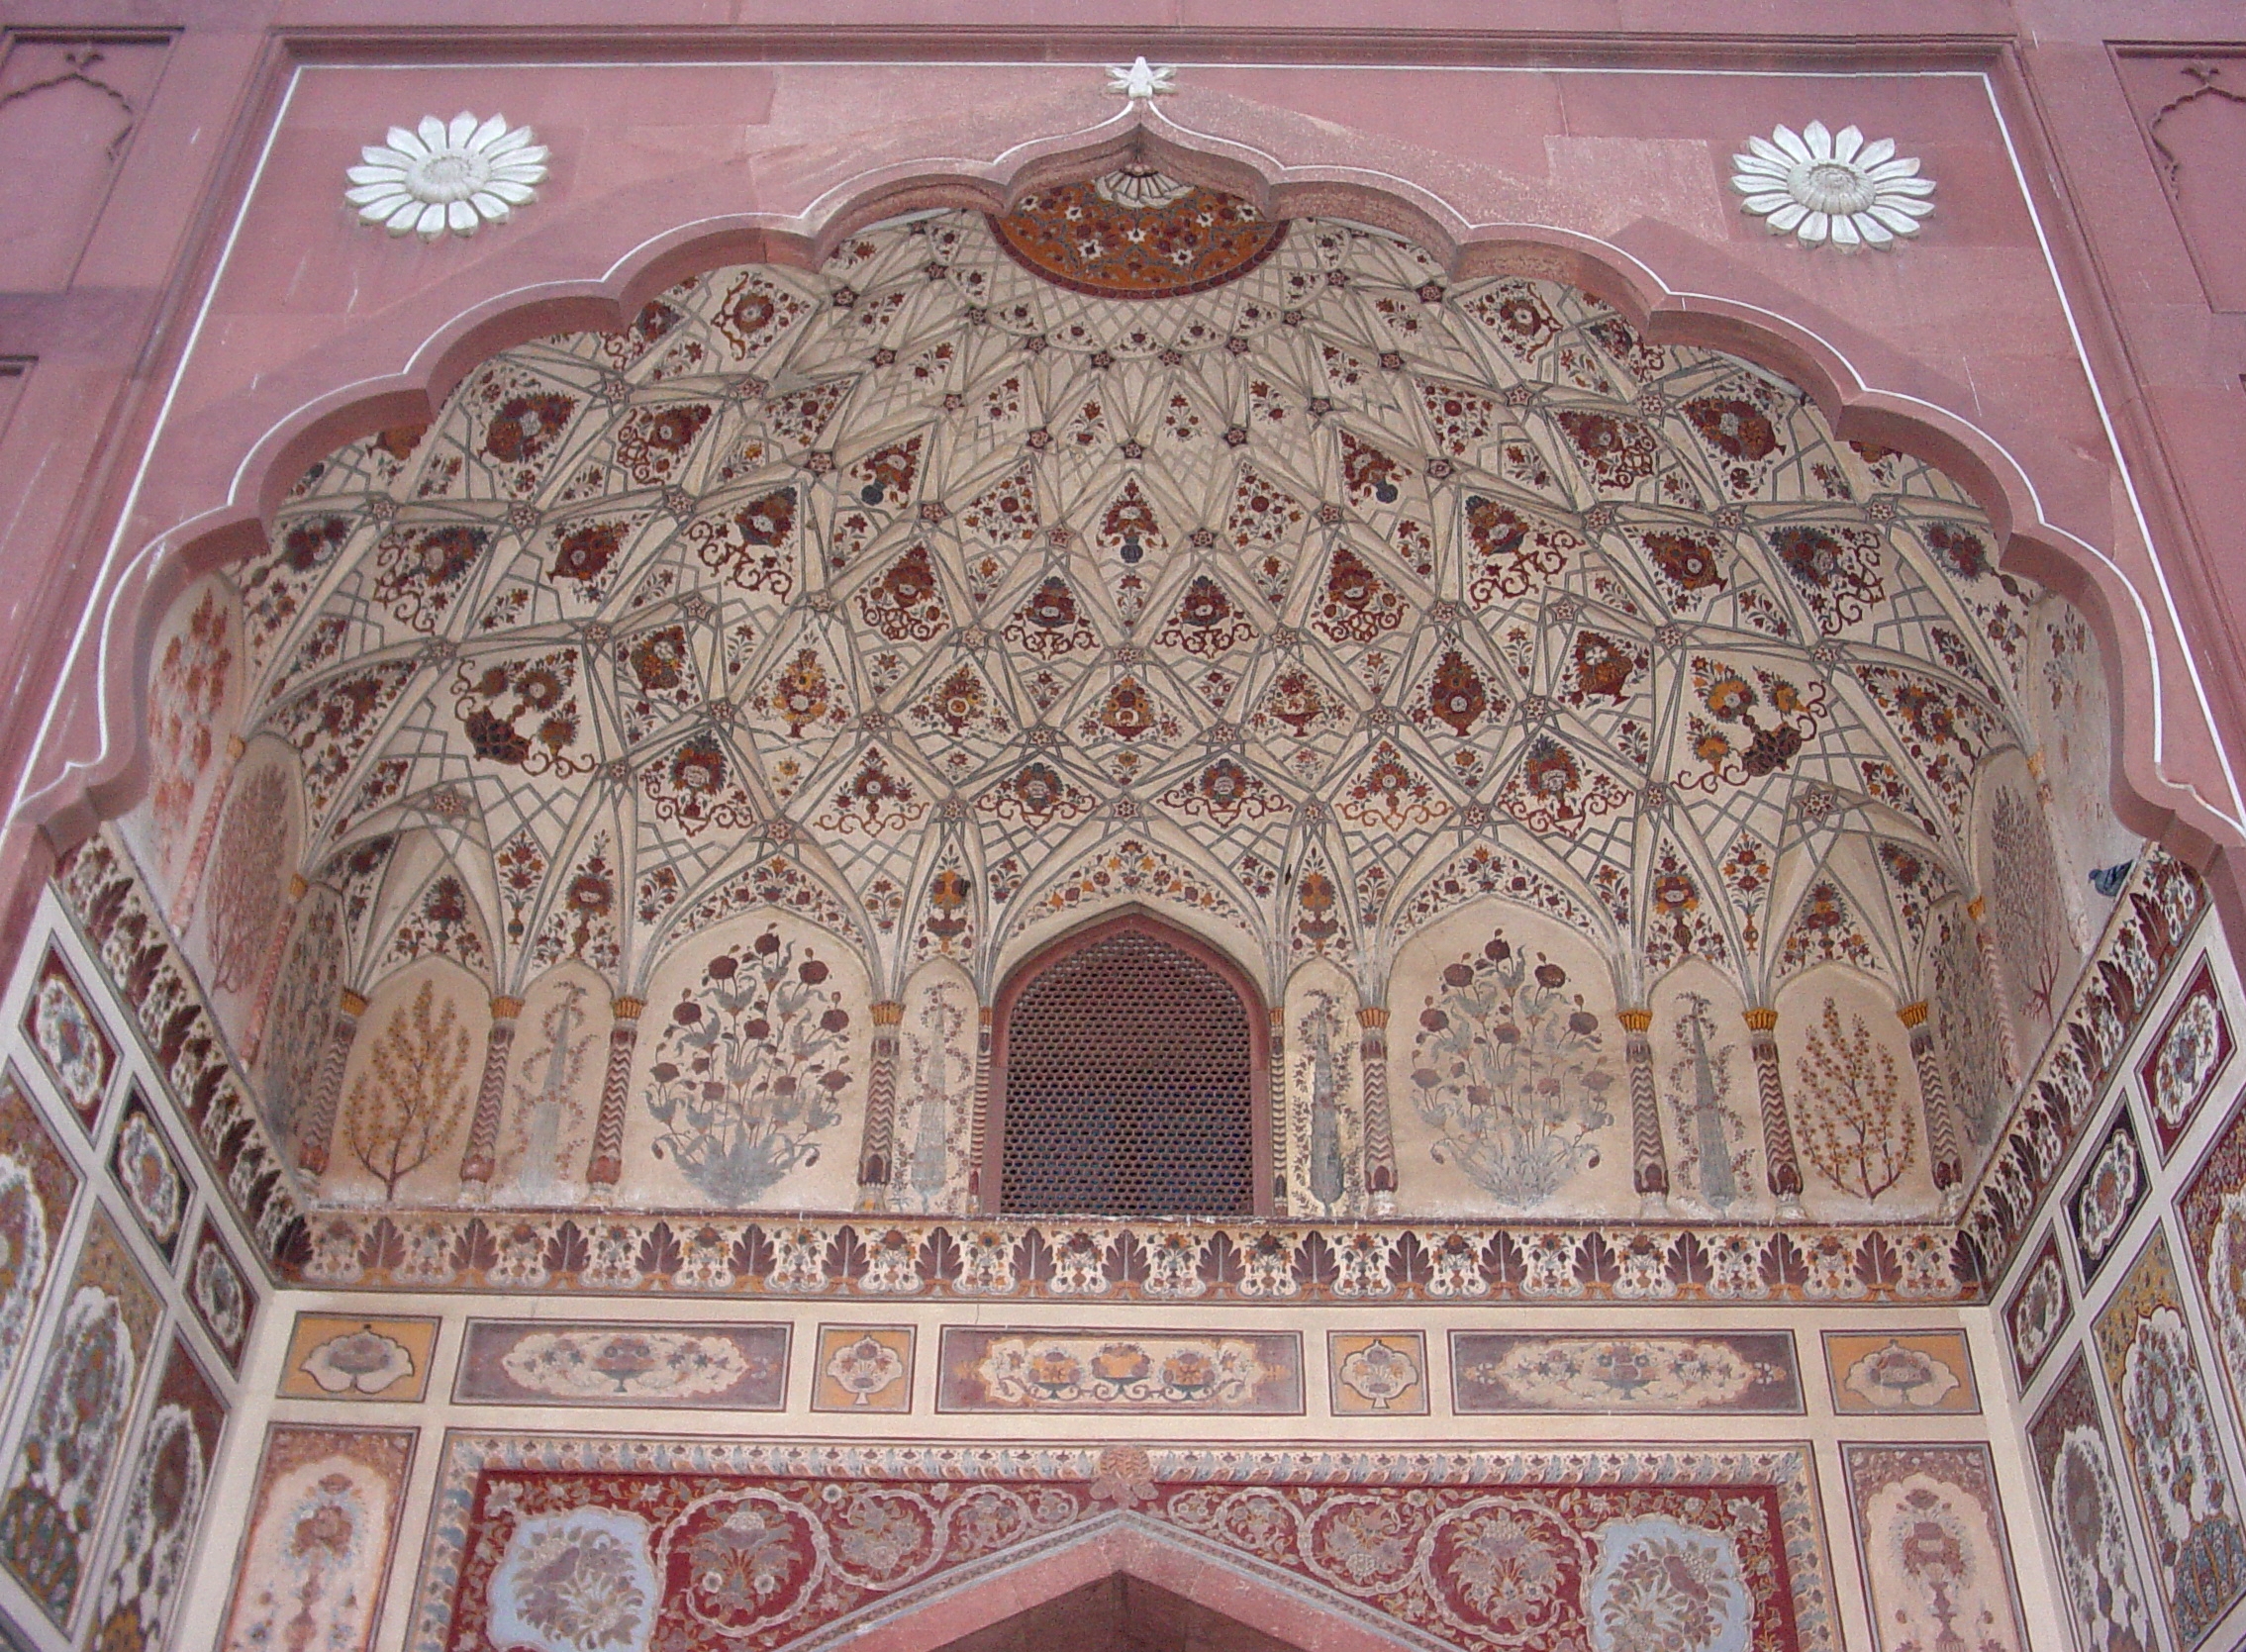 Palace or Mosque painting inside